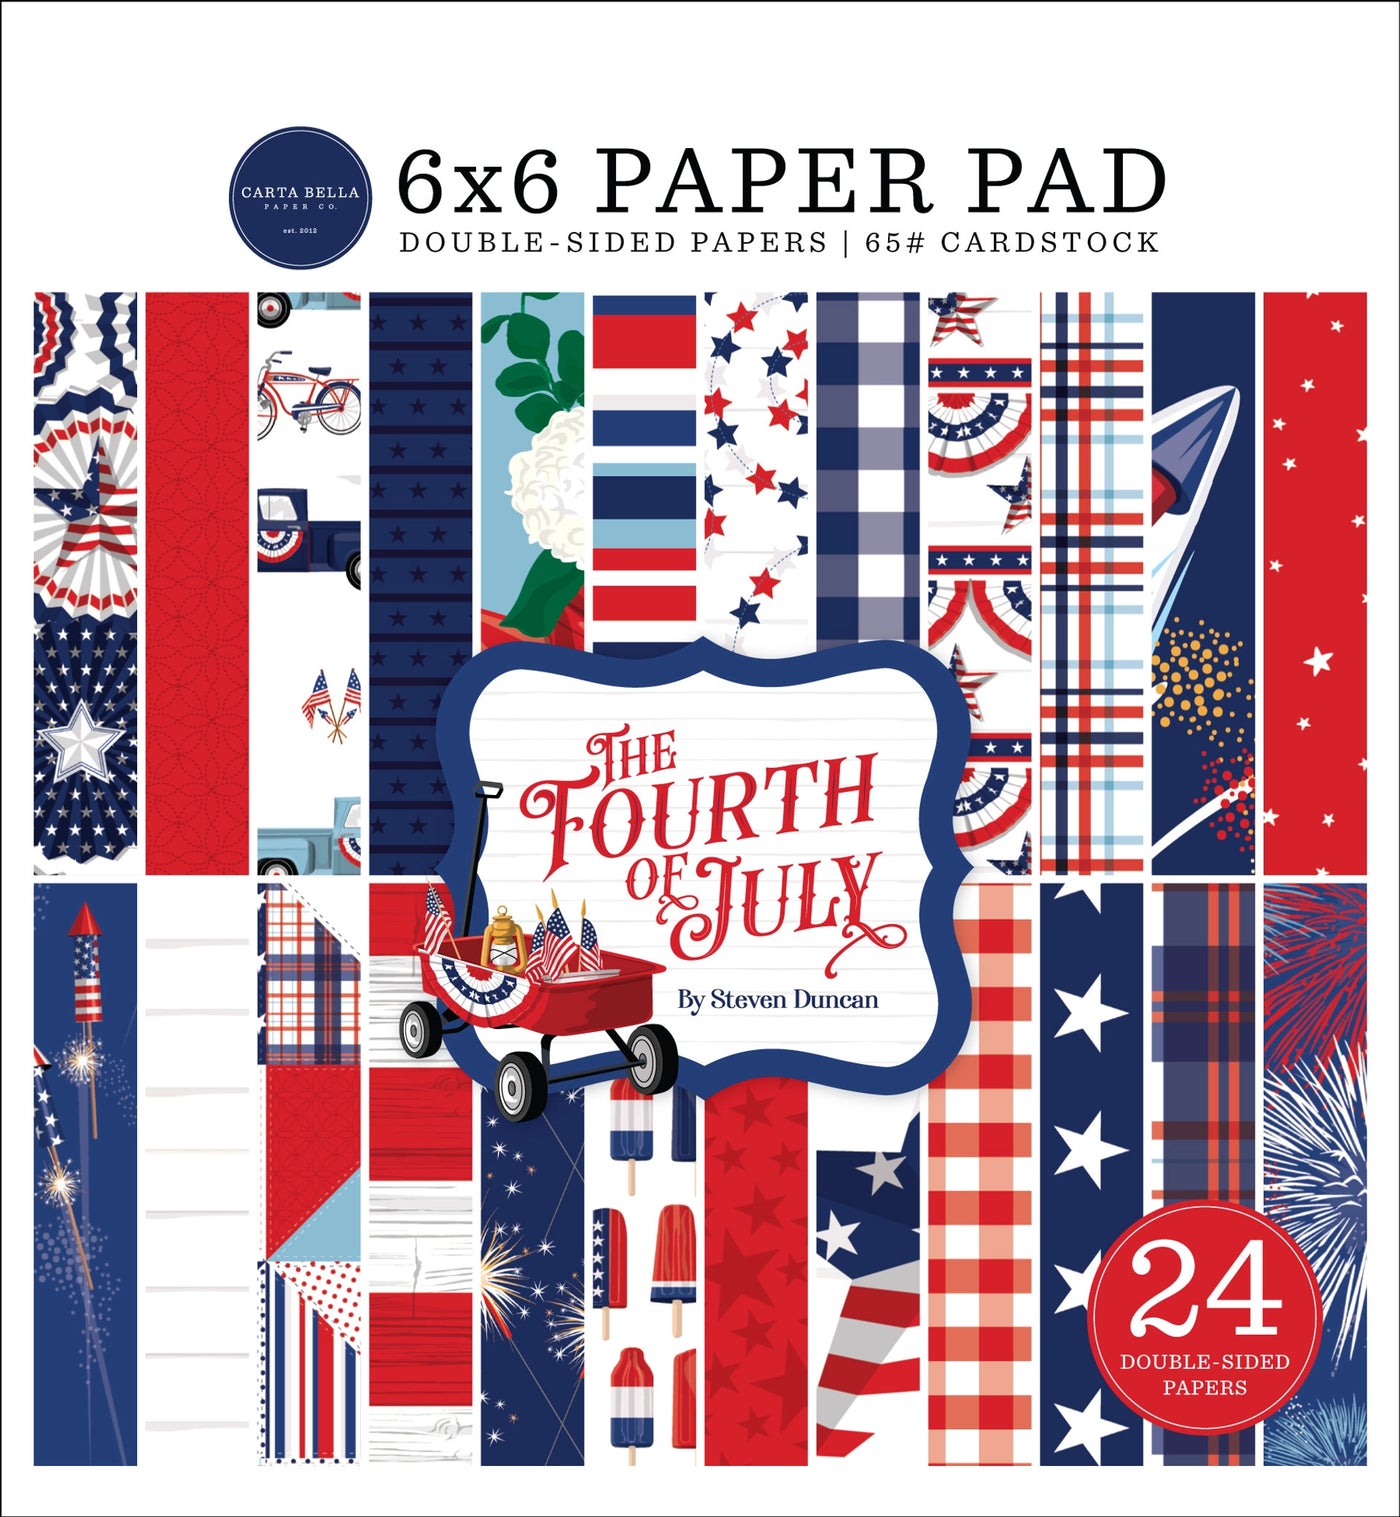 Versatile 6x6 pad with 24 double-sided sheets with colorful patterns and images to celebrate the 4th of July and the love of country. Great for card making and pages.